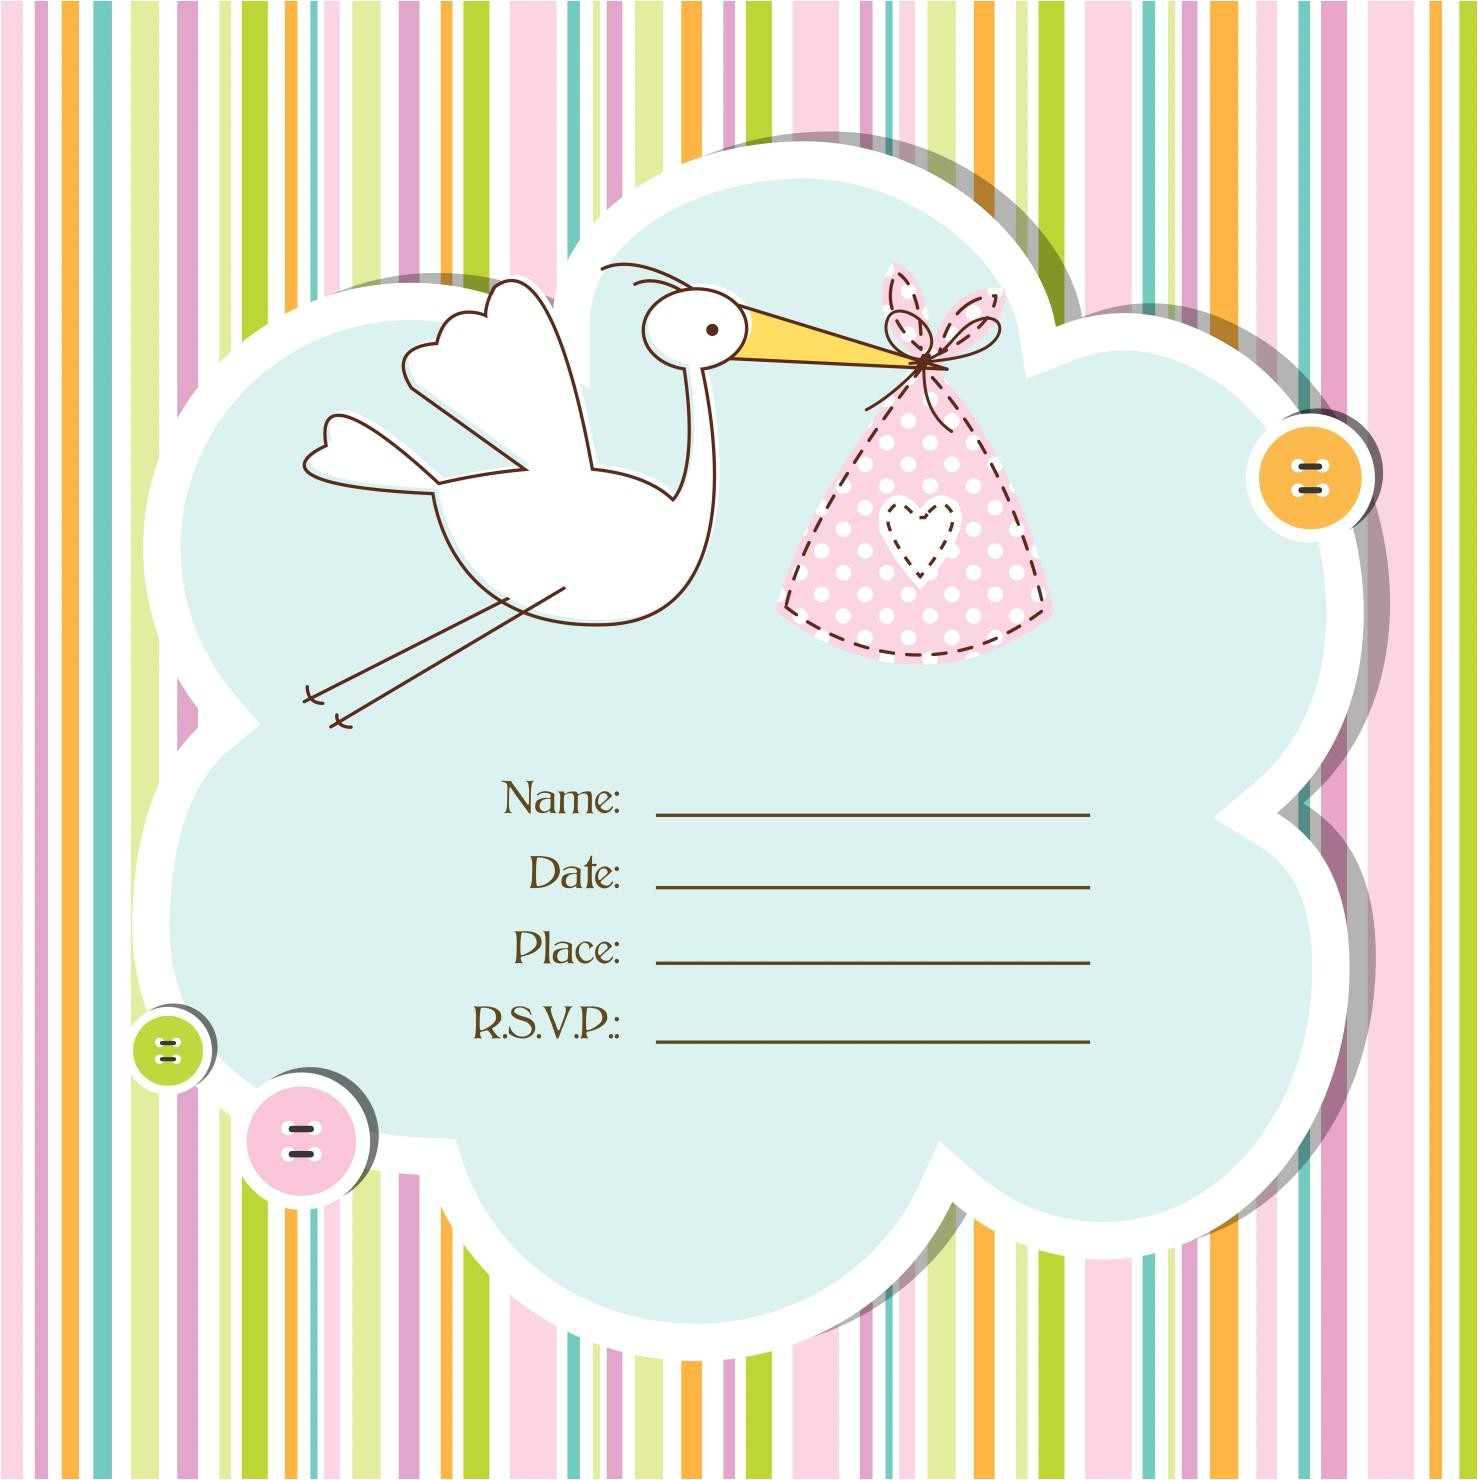 Make Your Own Baby Shower Invitations Free Printables Create Your Own Printable Invitations Printable 360 Degree